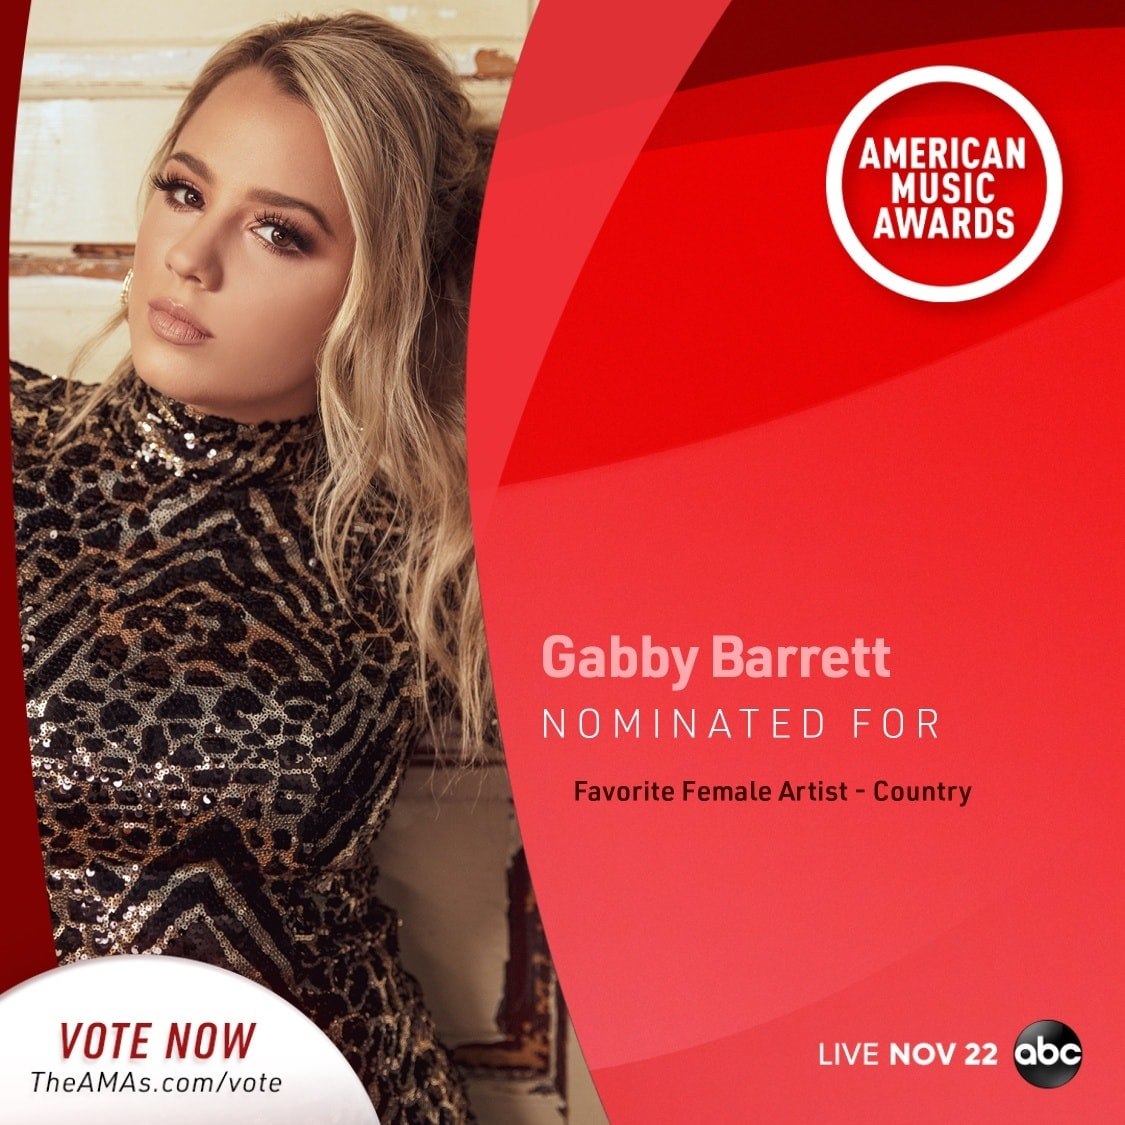 Congratulations to Gabby Barrett for being nominated for Favorite Female Artist – Country at the 2020 American Music Awards!
